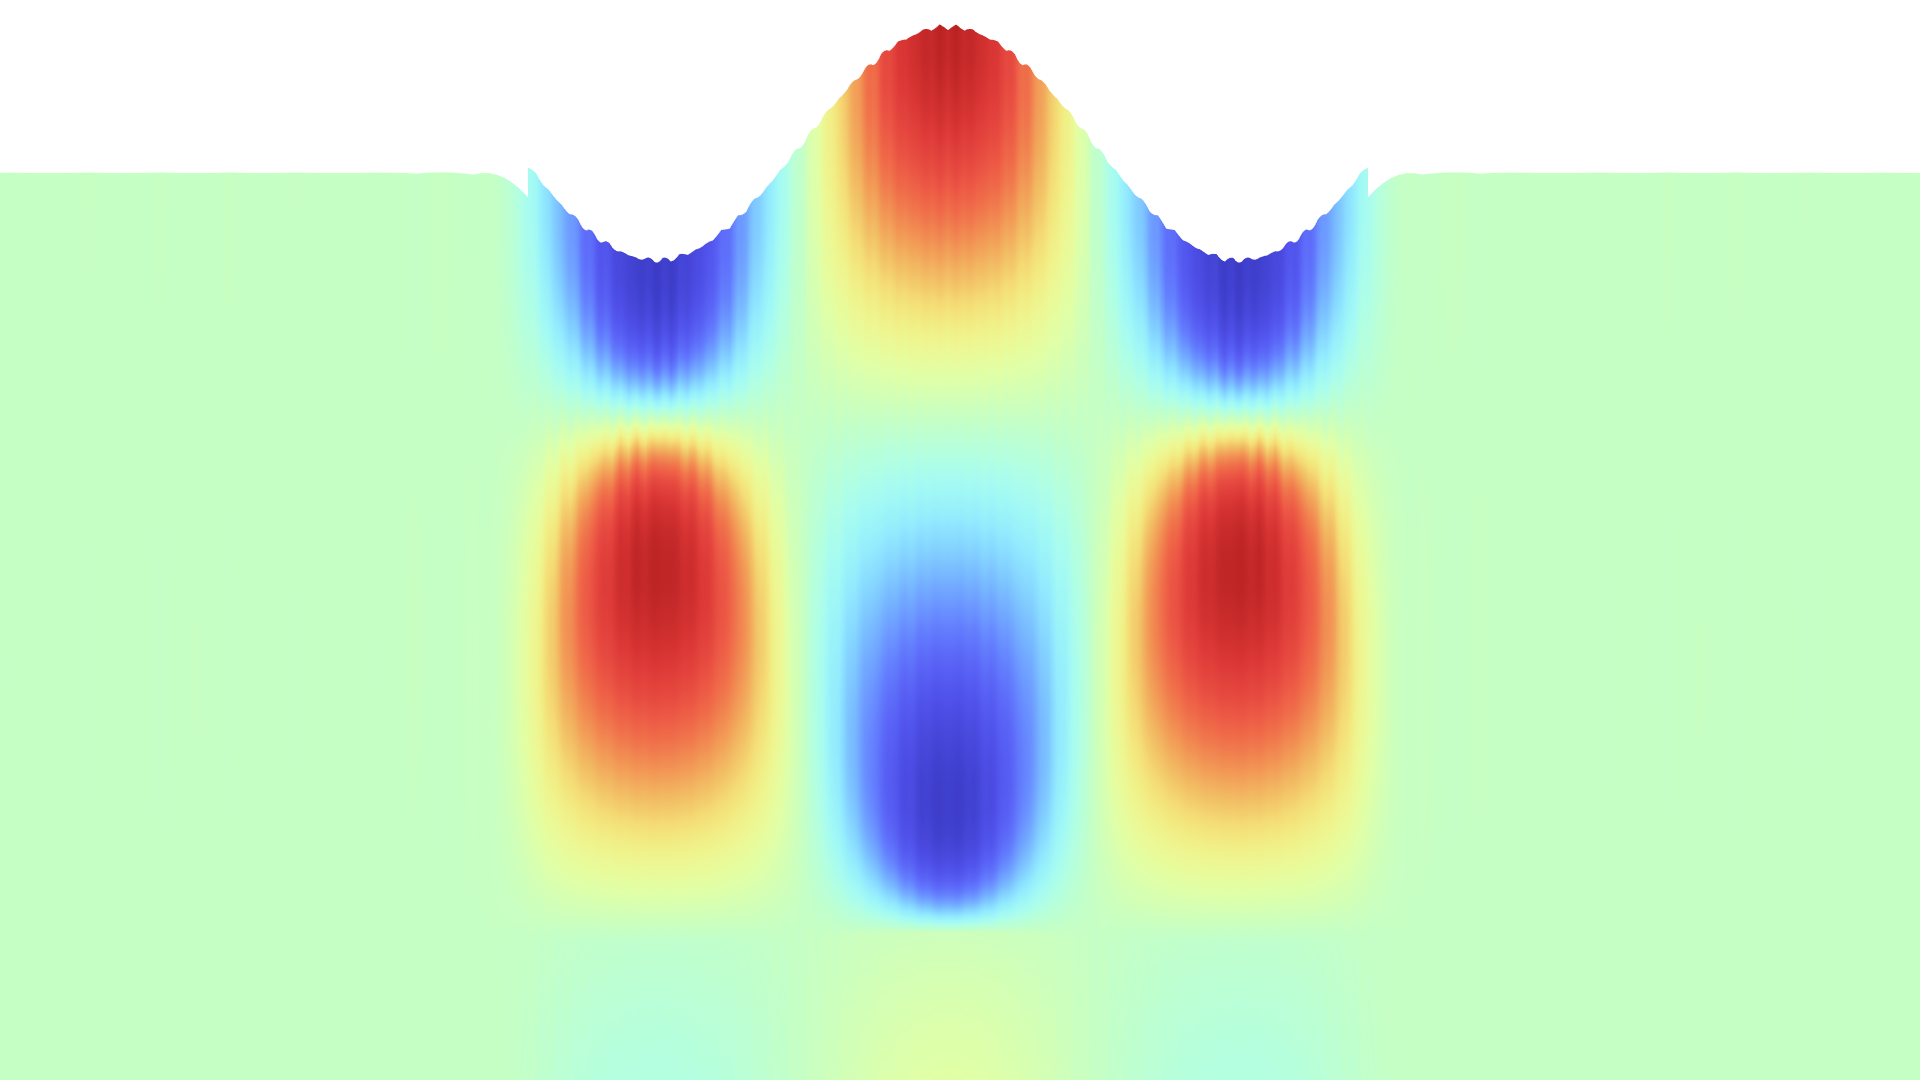 One example of the displacement field for an eigenmode.